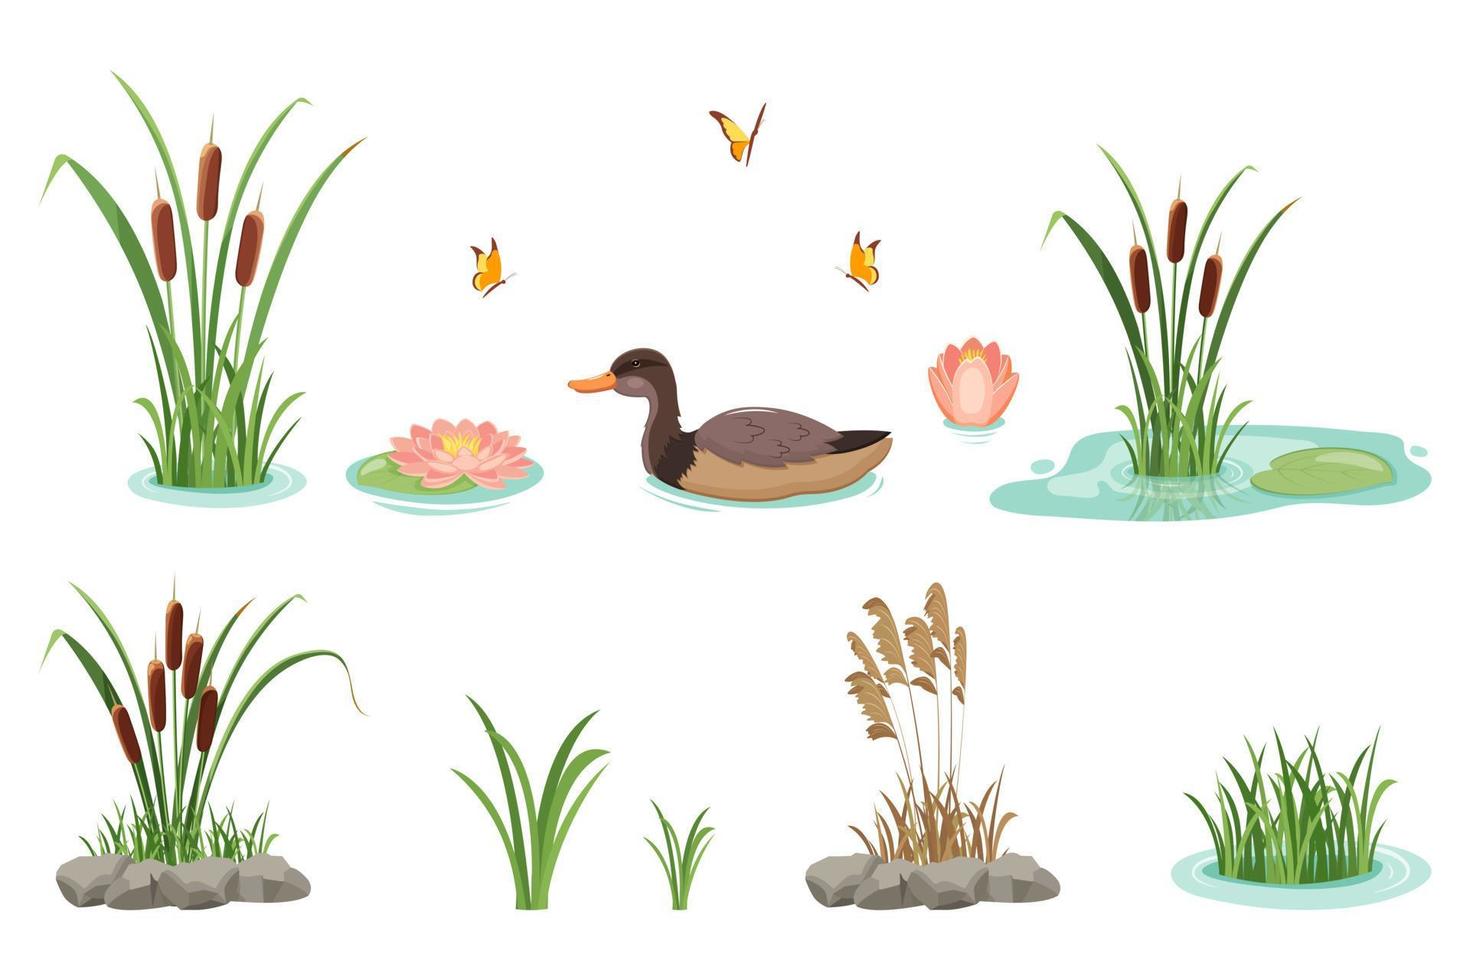 Reeds with grass and water lilies isolated on white background. Wild swimming duck. Lake cattail. vector